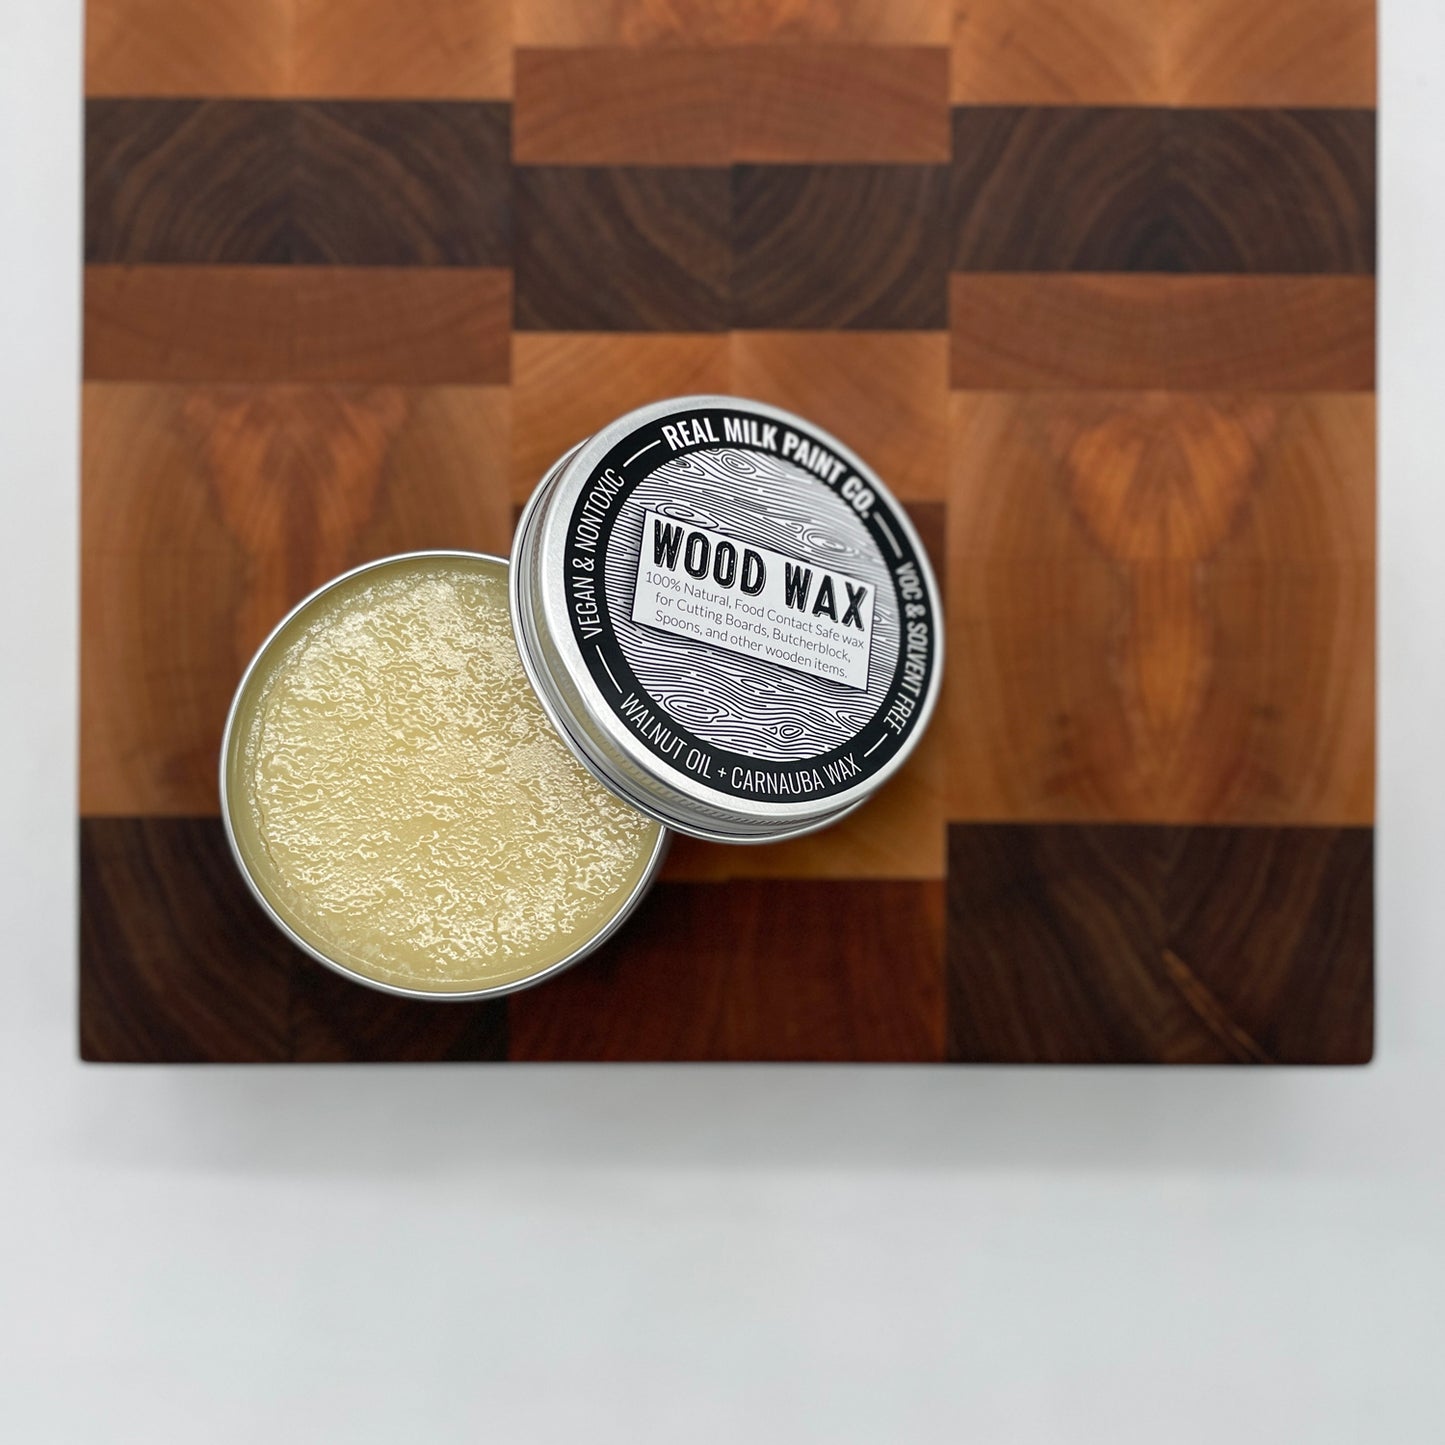 DIY Wood Wax Finish Made With Soy Wax Quite Cheap And Vegan! 